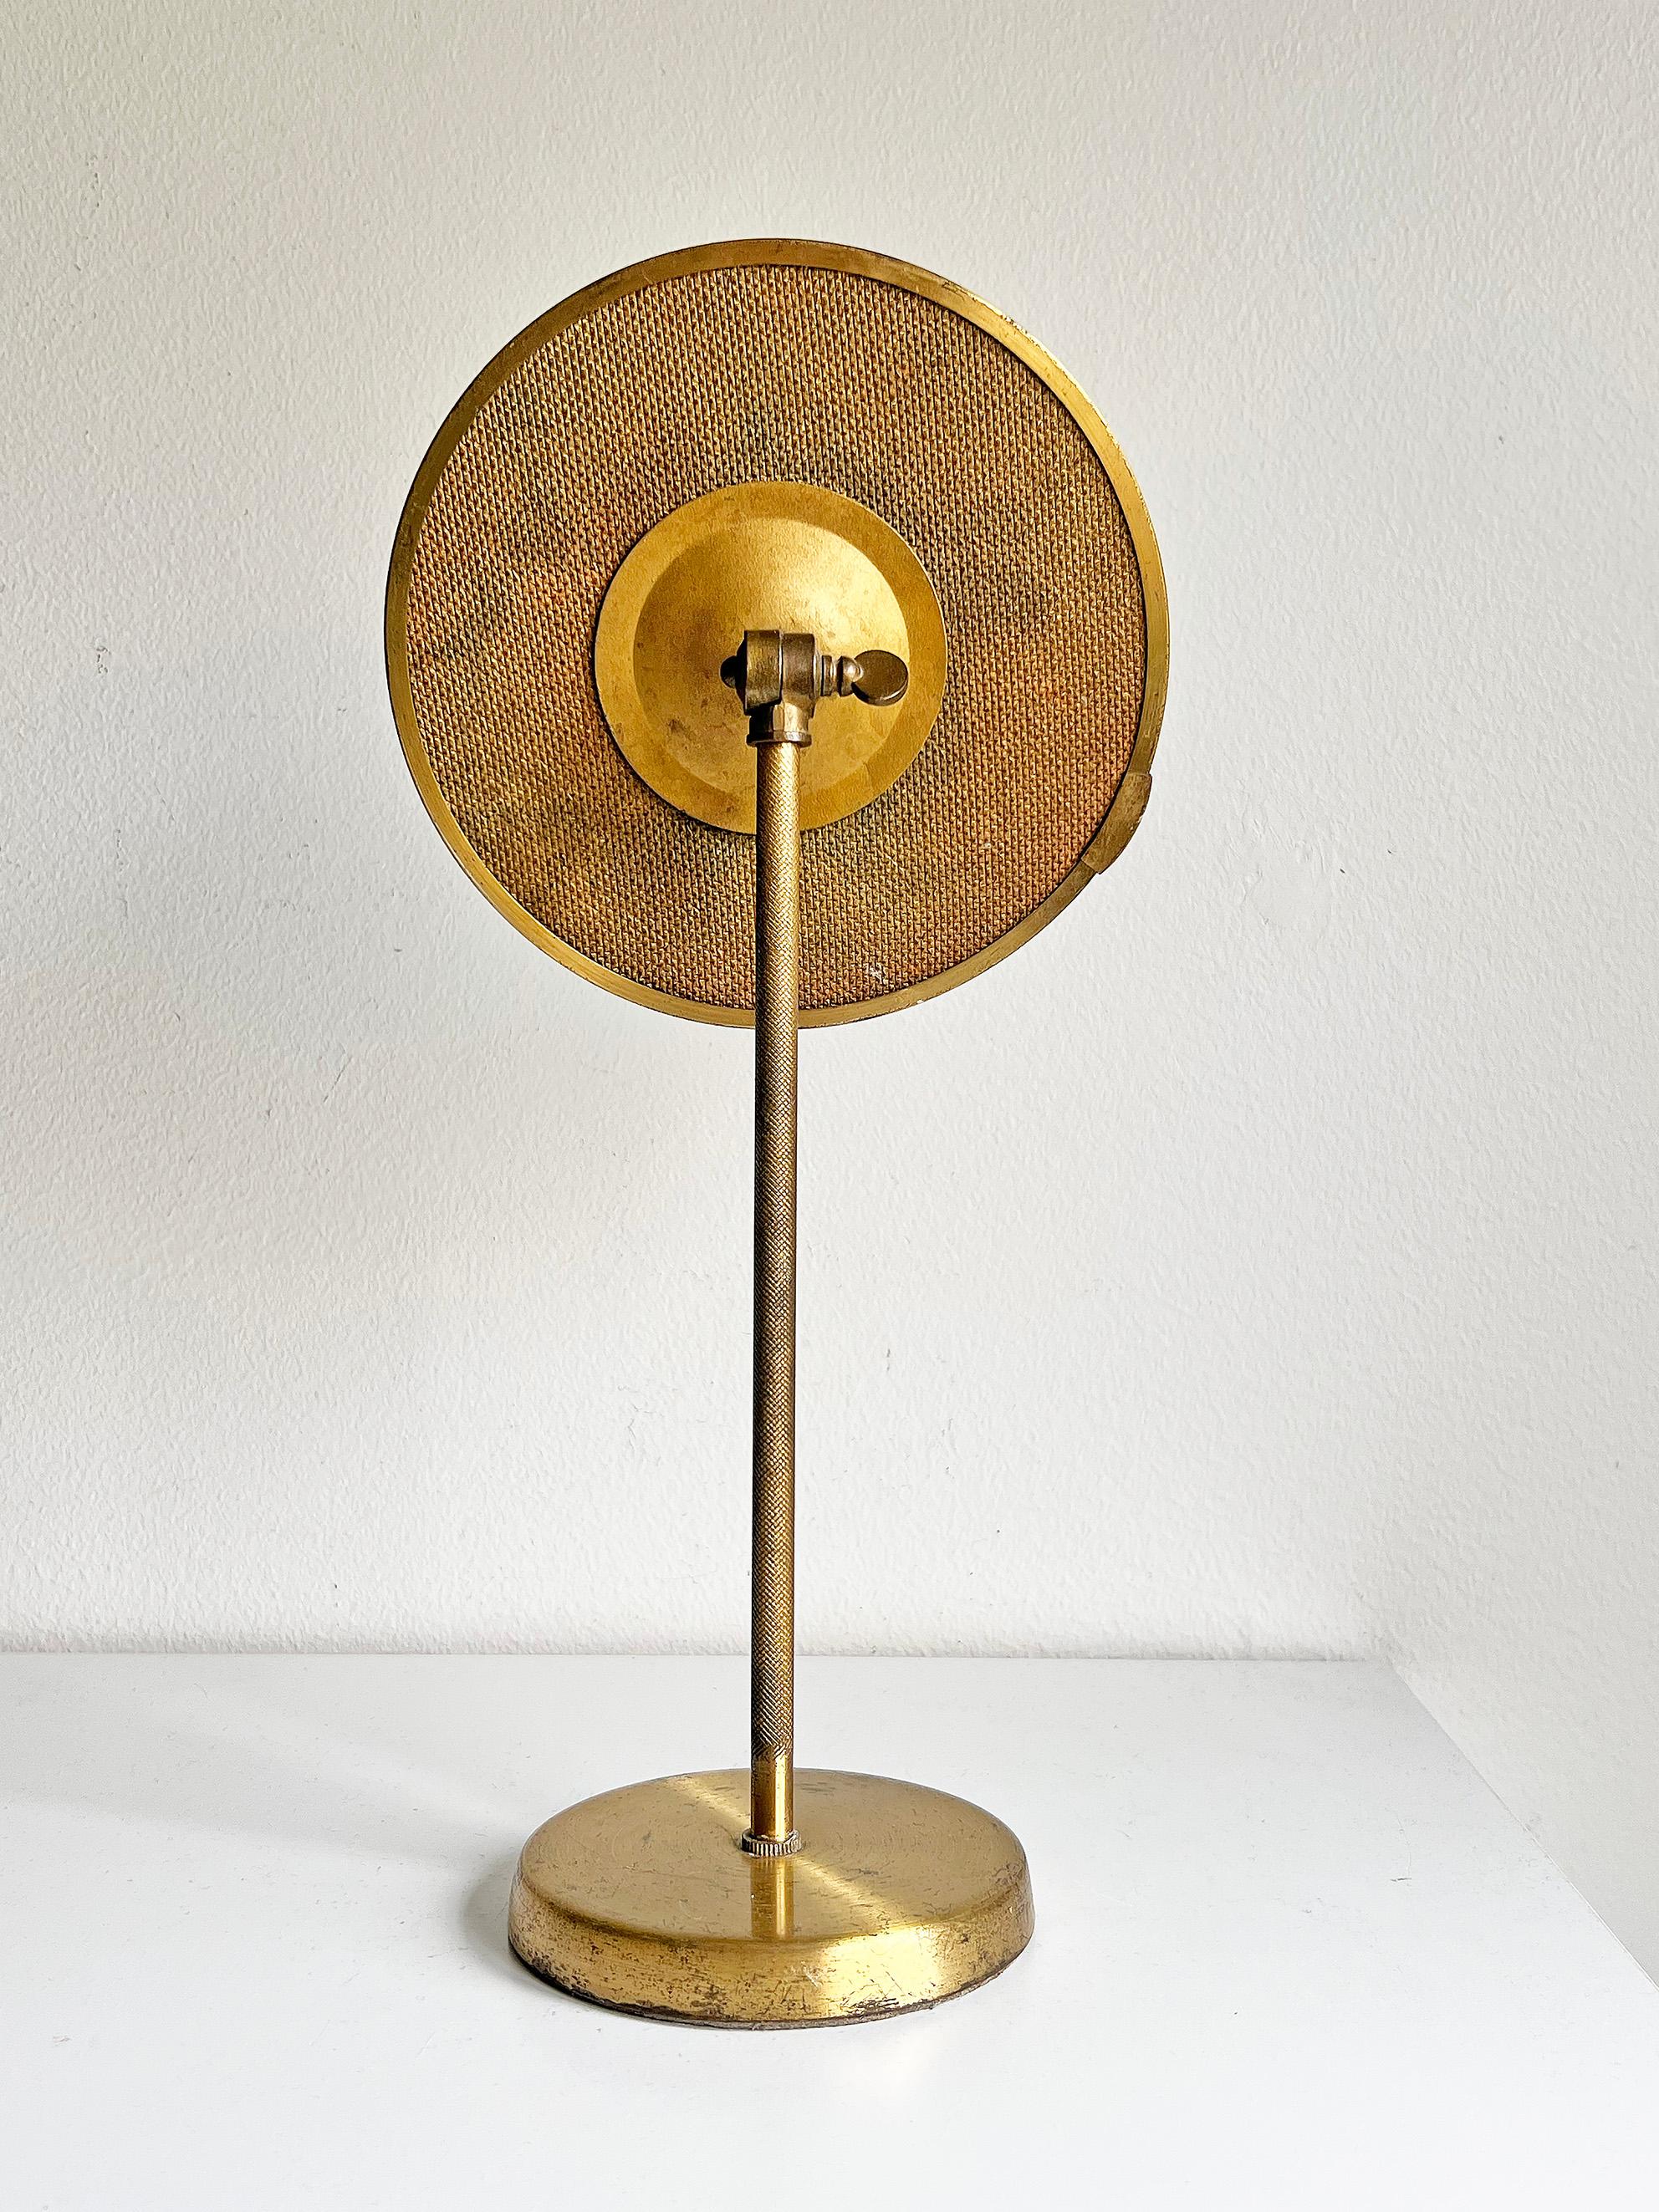 Swedish Mid-Century Modern Table Mirror in Brass, circa 1950s For Sale